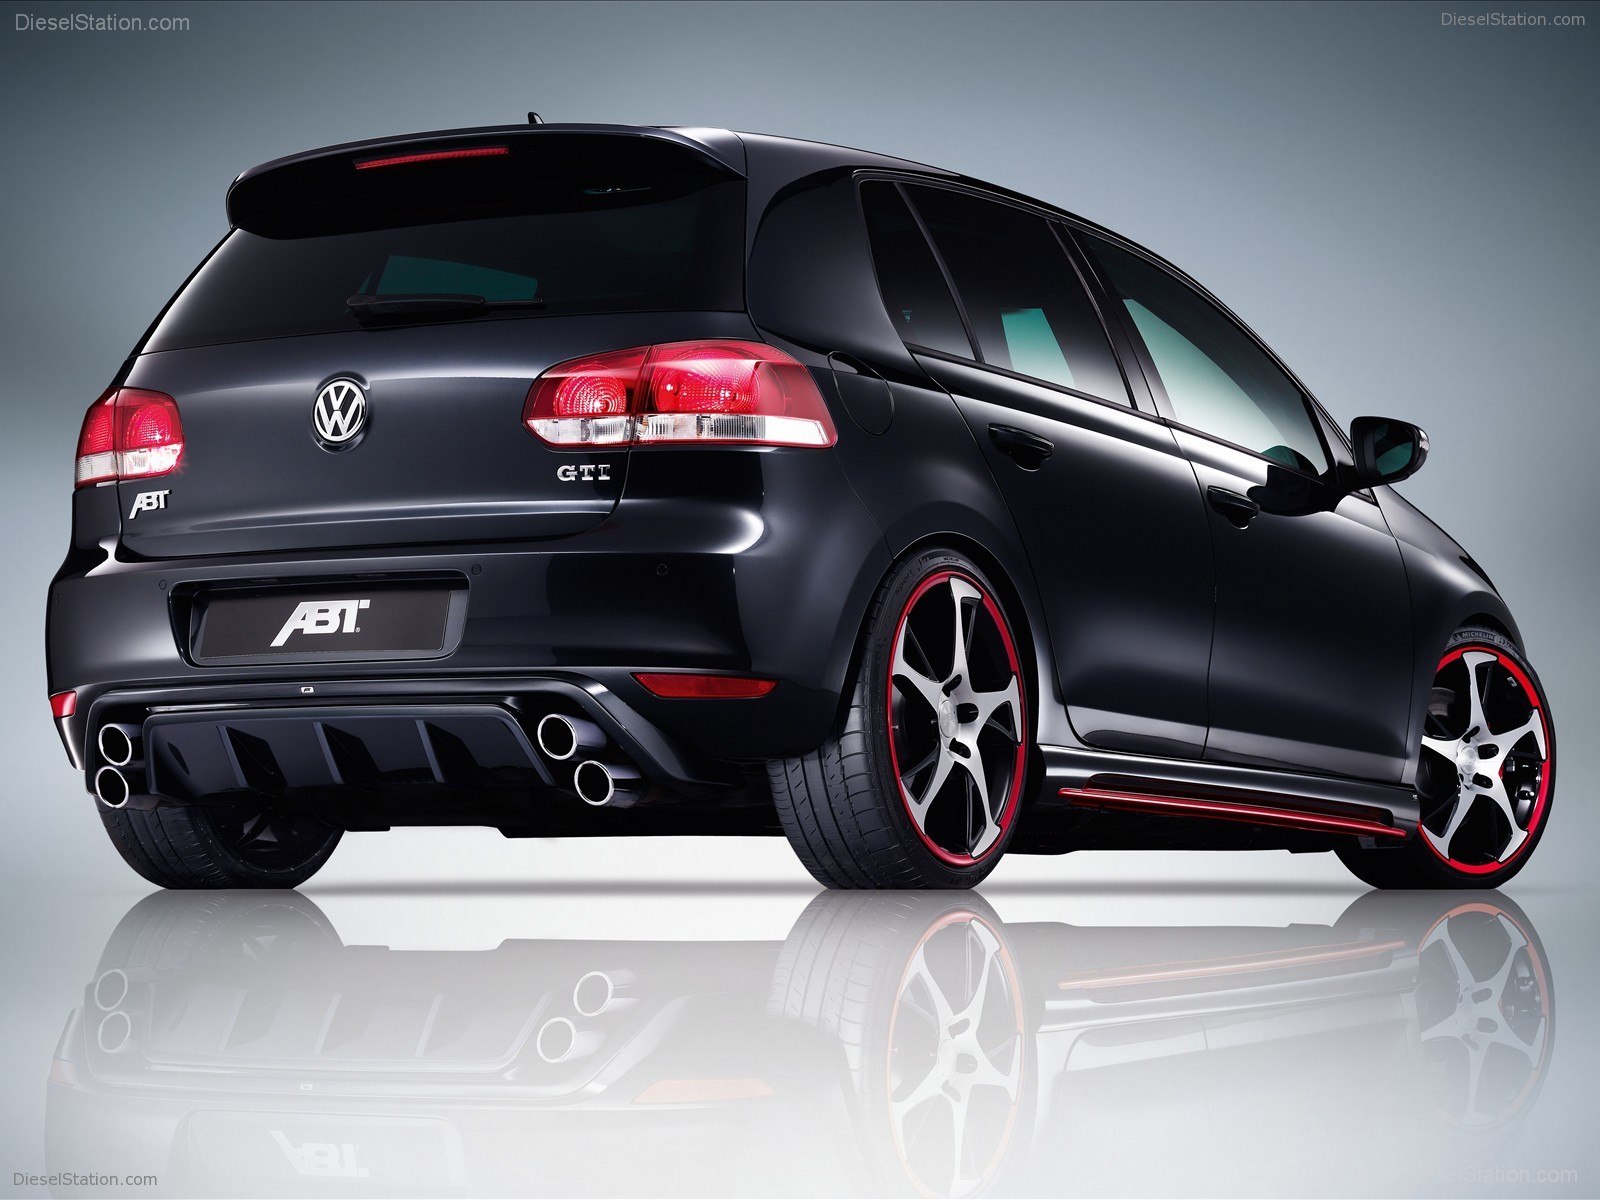 The New ABT Golf VI GTI Exotic Car Wallpaper of 10, Diesel Station